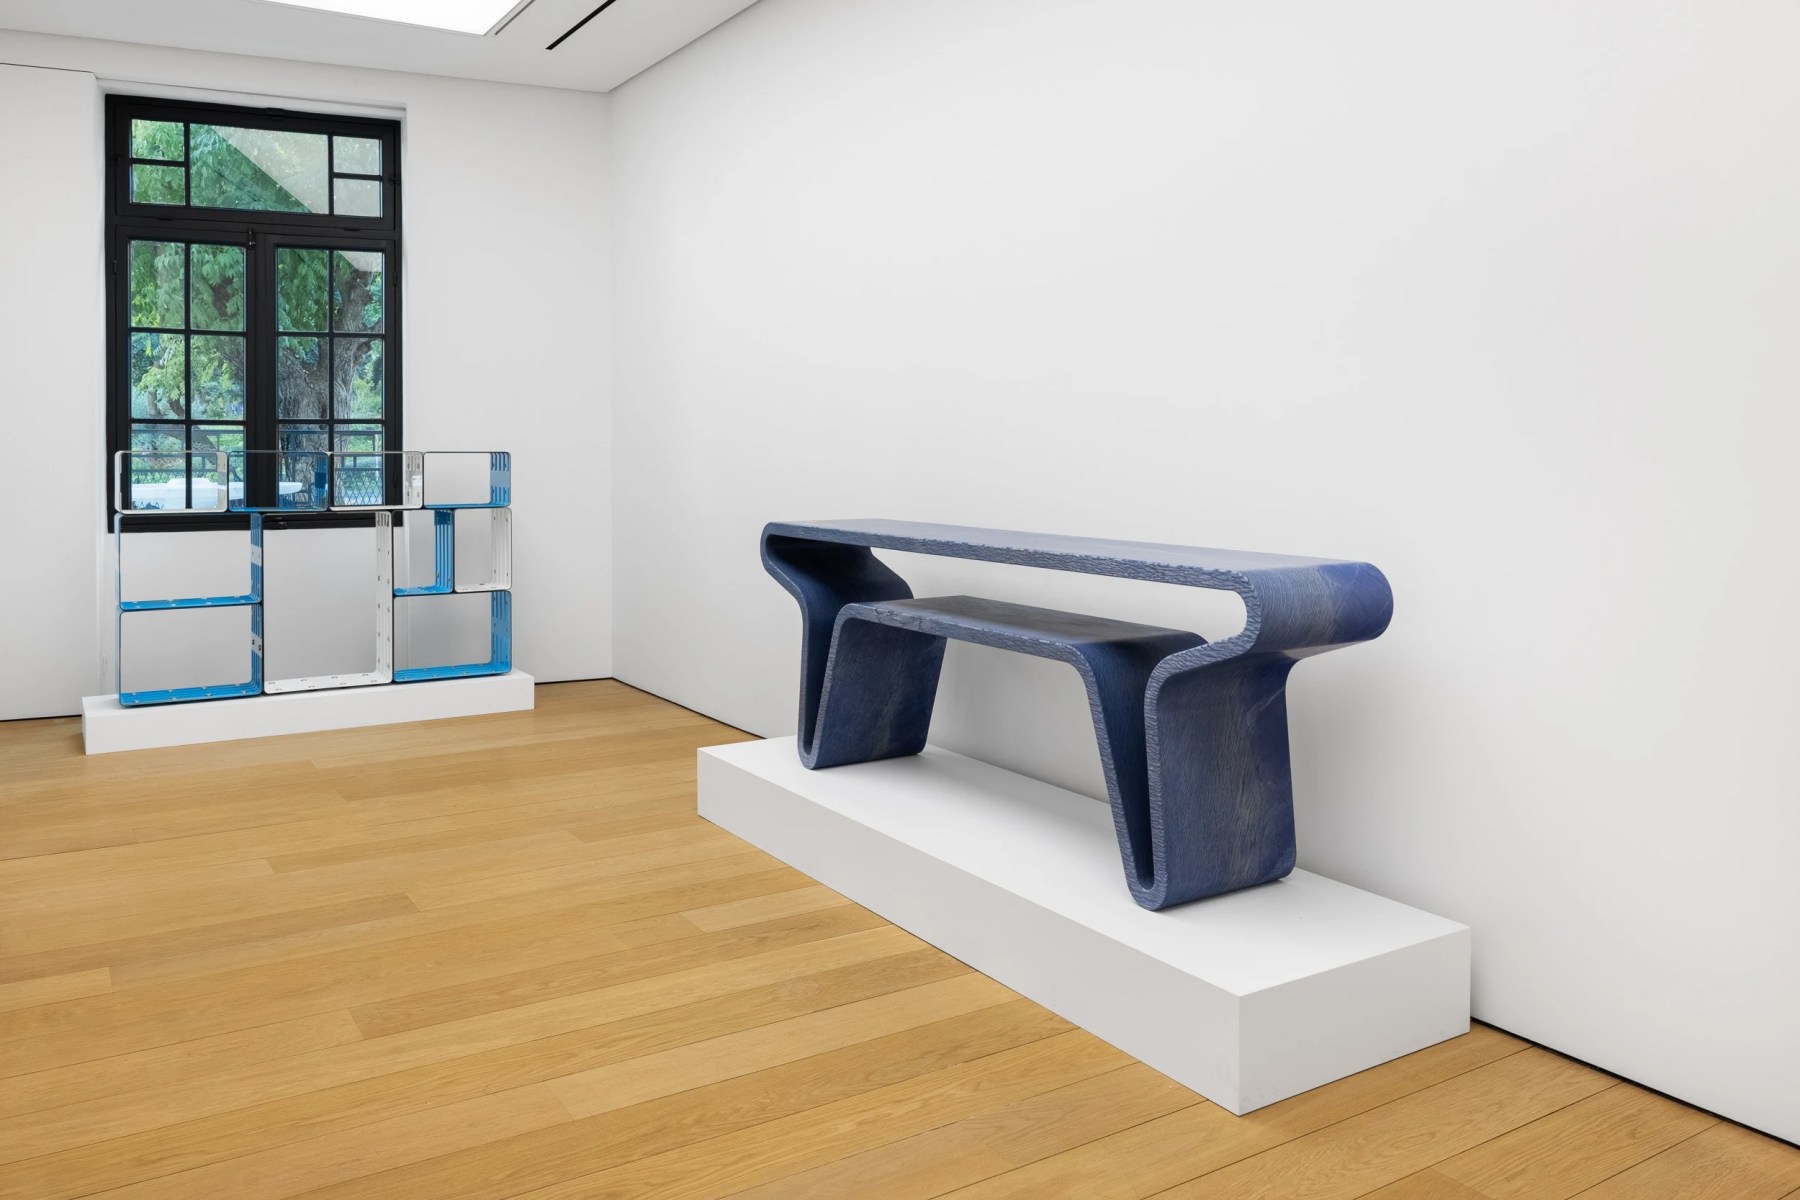 Marc Newson at Gagosian Gallery in London